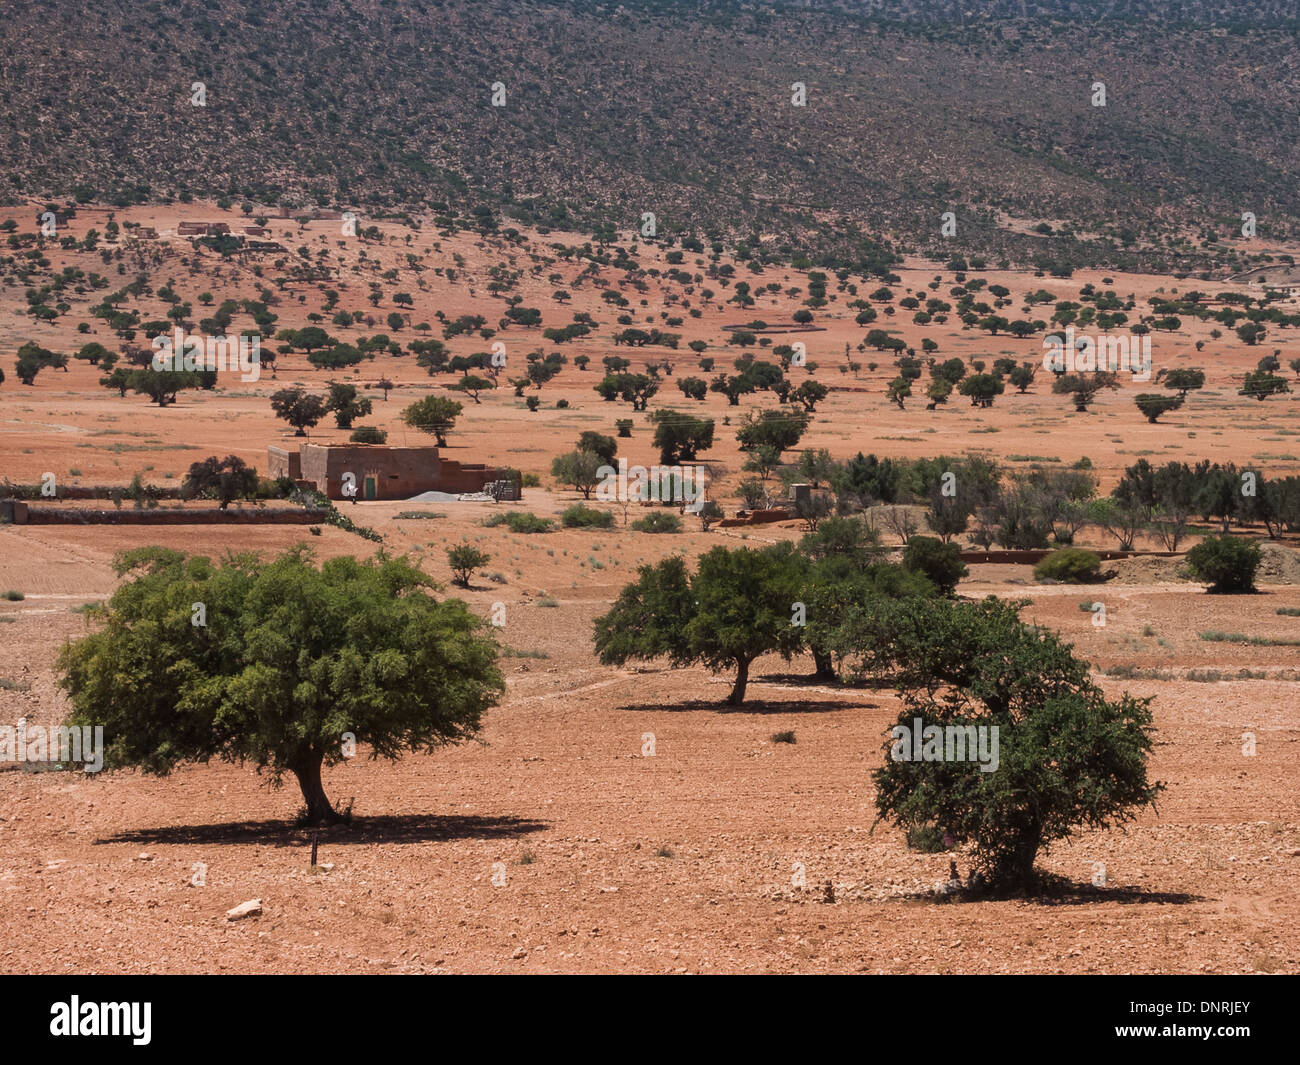 Olive trees in the middle of the Sahara Desert, near Tznit, Morocco Stock Photo